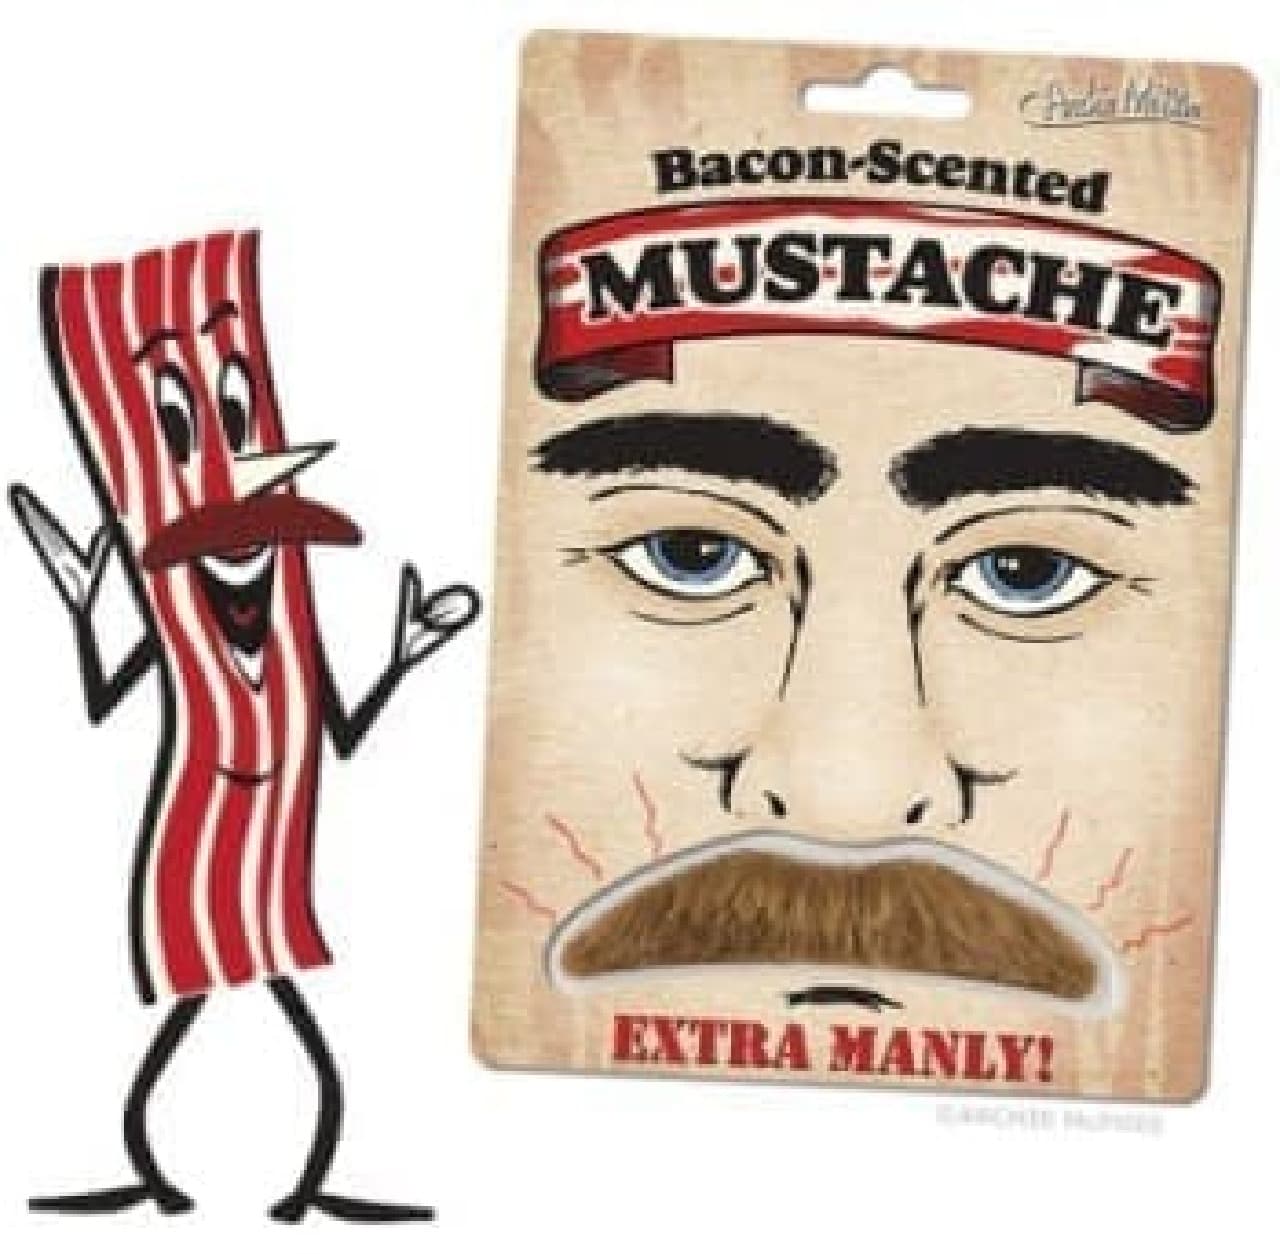 Speaking of masculinity, beard and bacon!